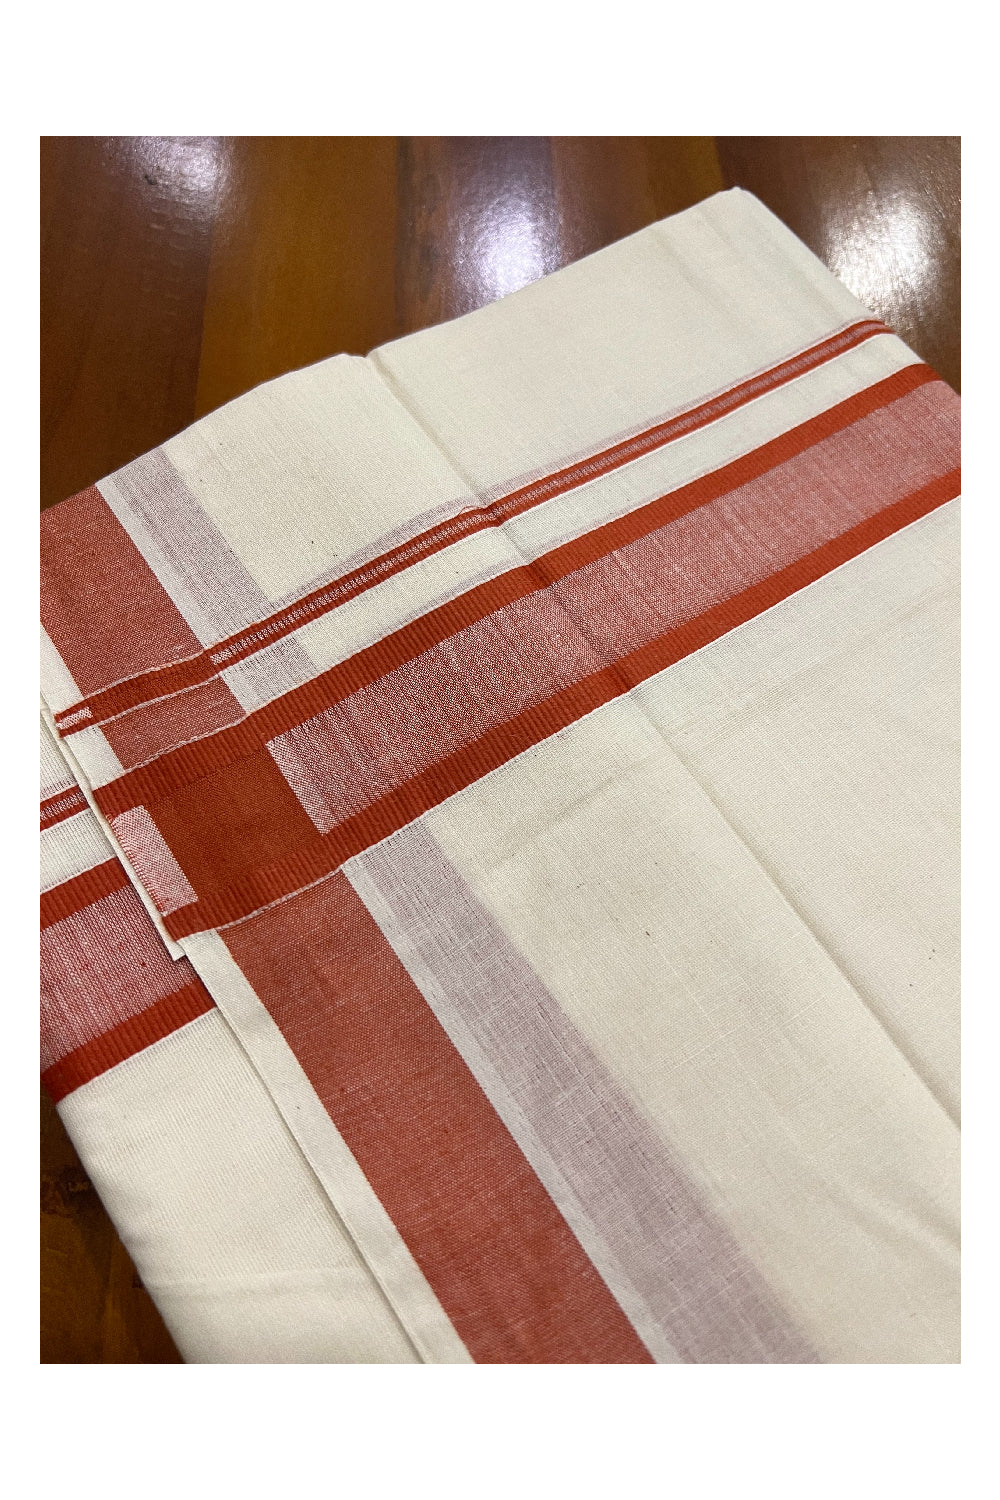 Off White Pure Cotton Double Mundu with Brick Red Border (South Indian Kerala Dhoti)